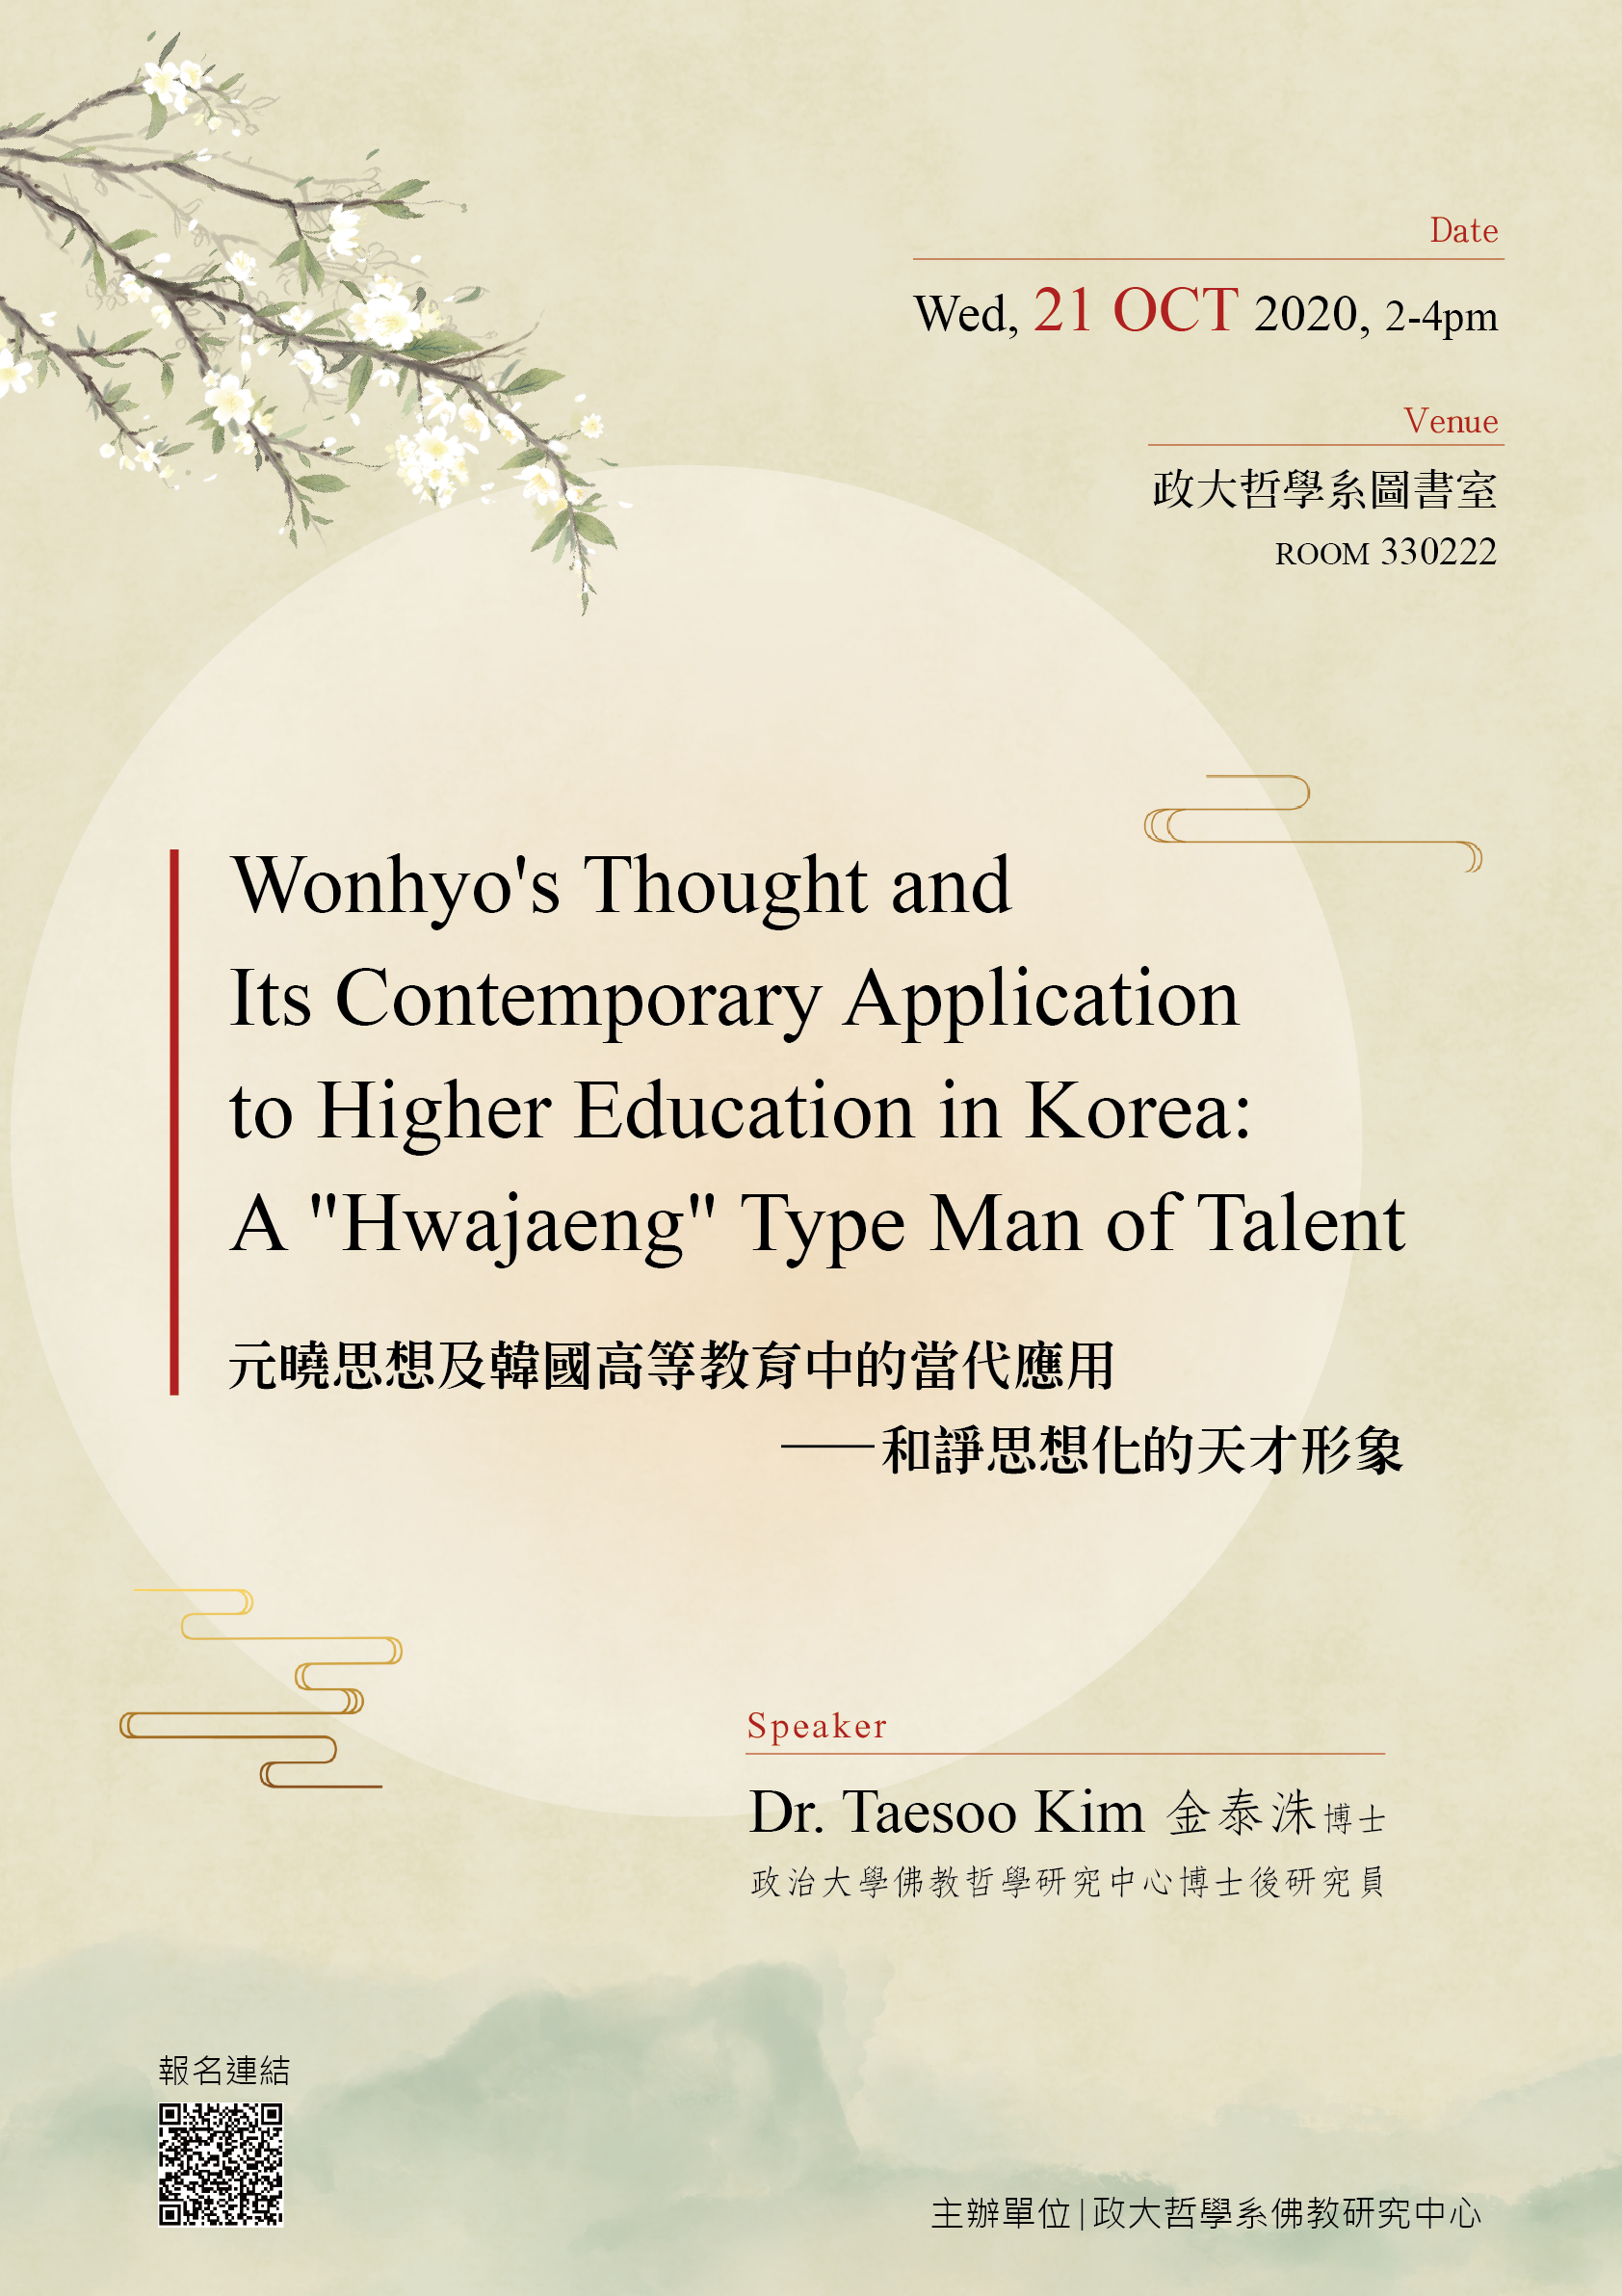 Wonhyo's Thought and Its Contemporary Application to Higher Education in Korea: A "Hwajaeng" Type Man of Talent"